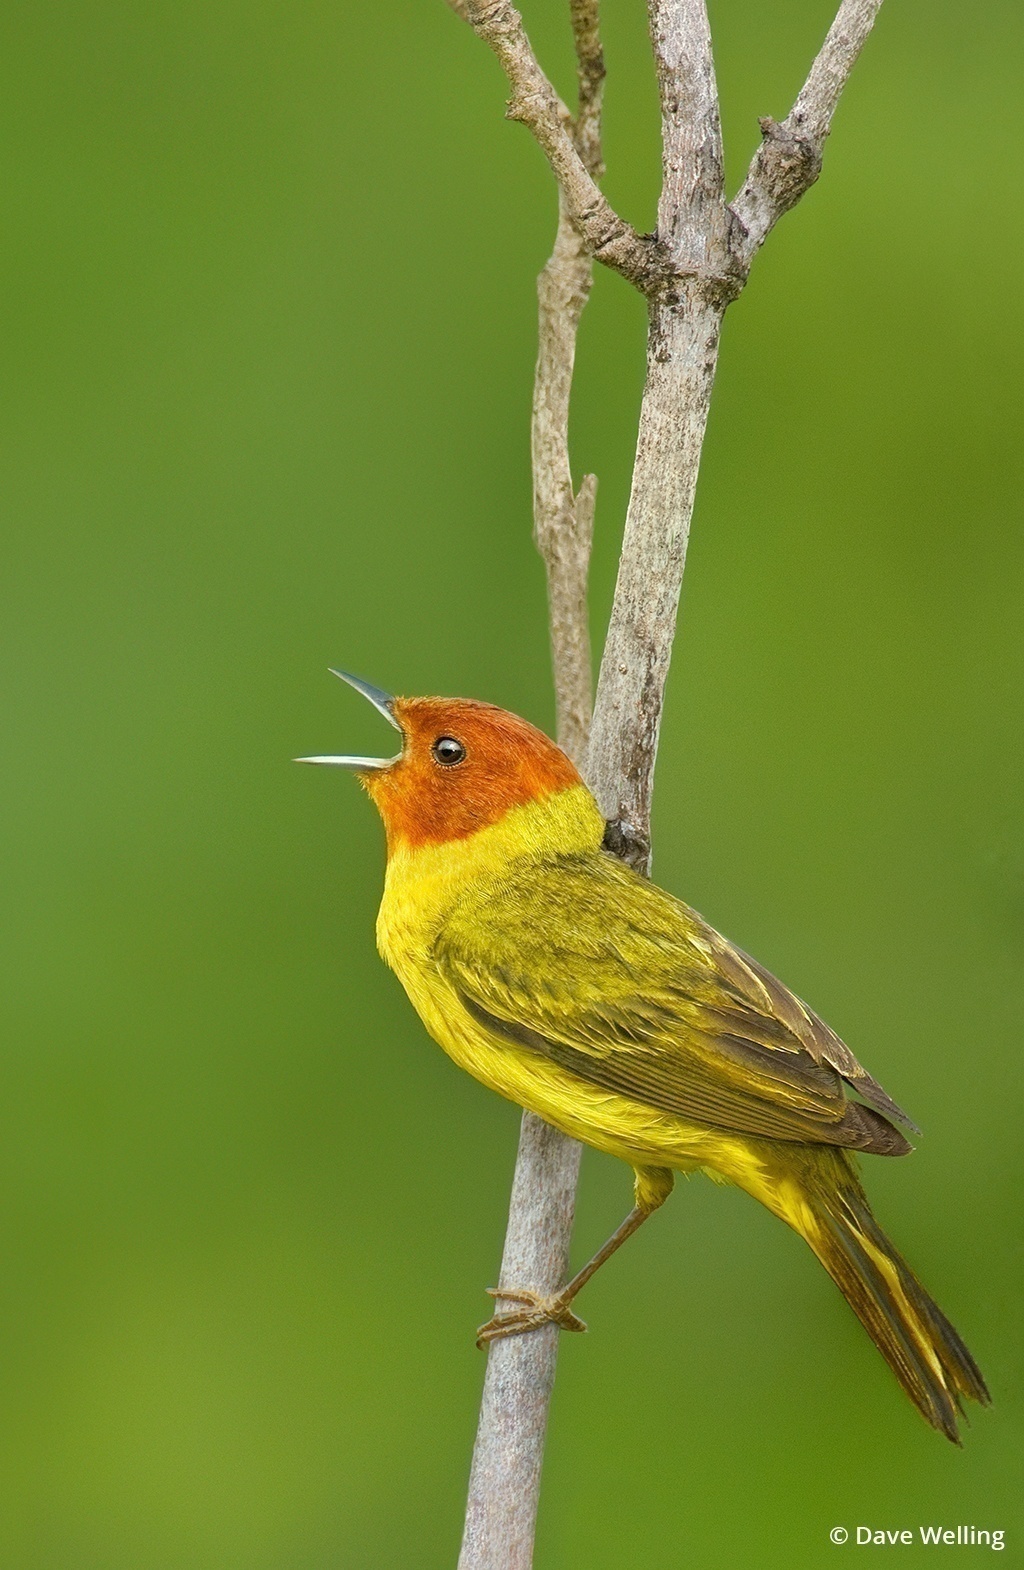 Image of a mangrove yellow warbler.